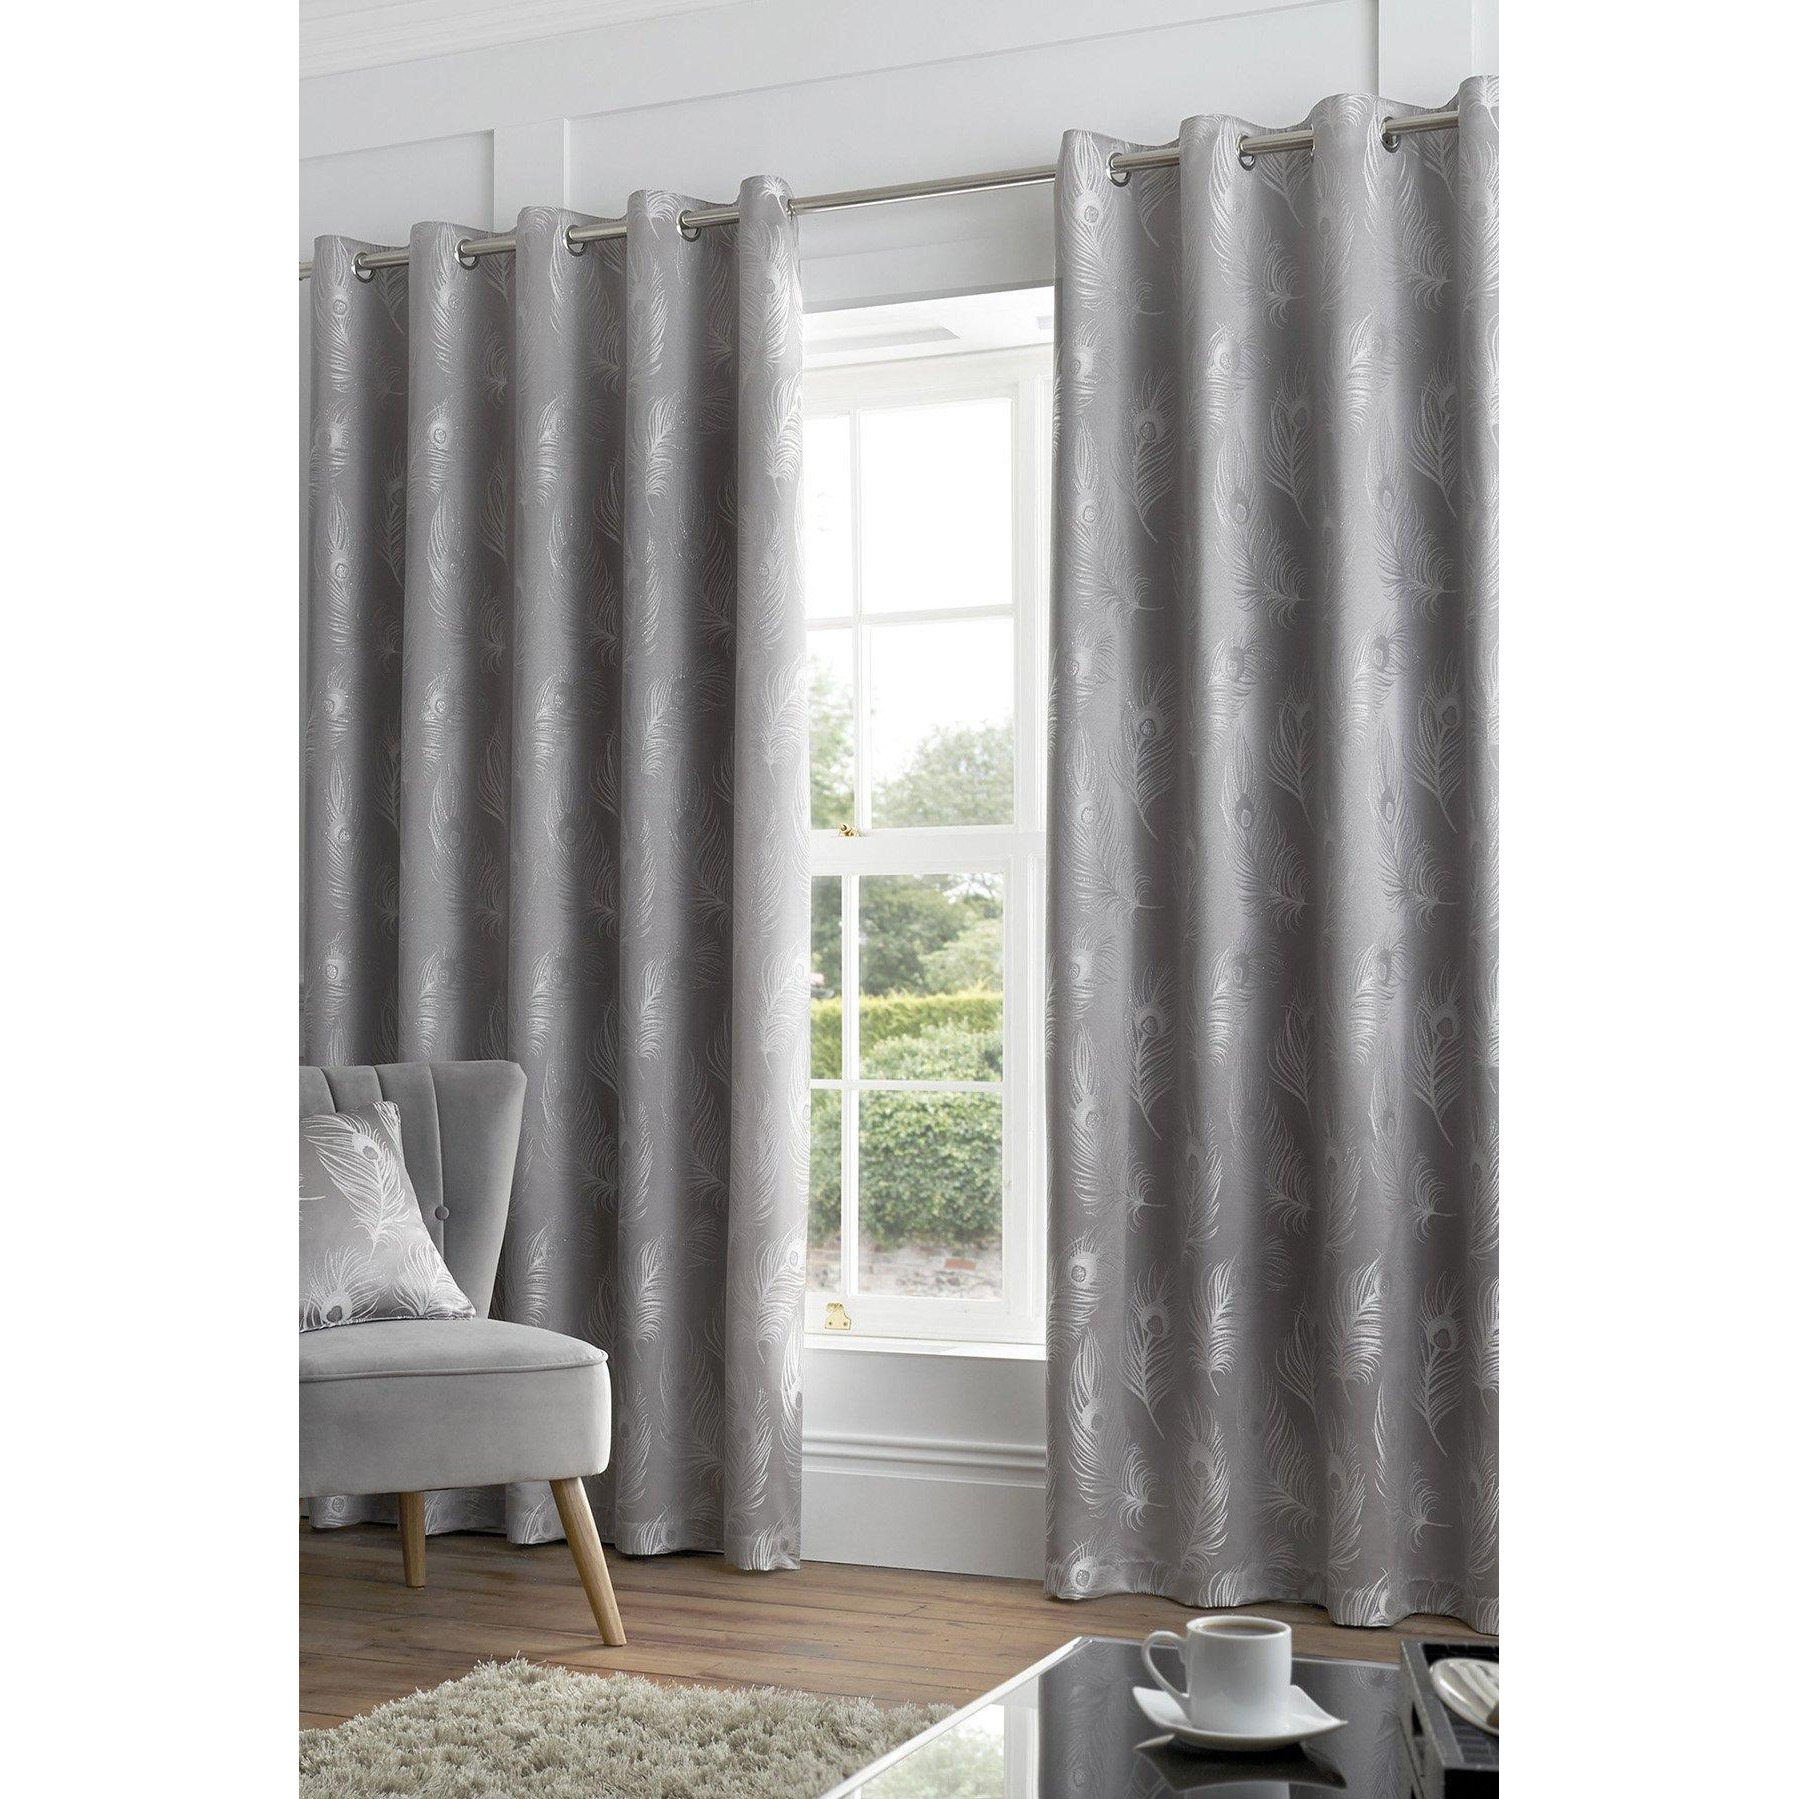 'Feather' Metallic Feather Jacquard Pair of Eyelet Curtains - image 1